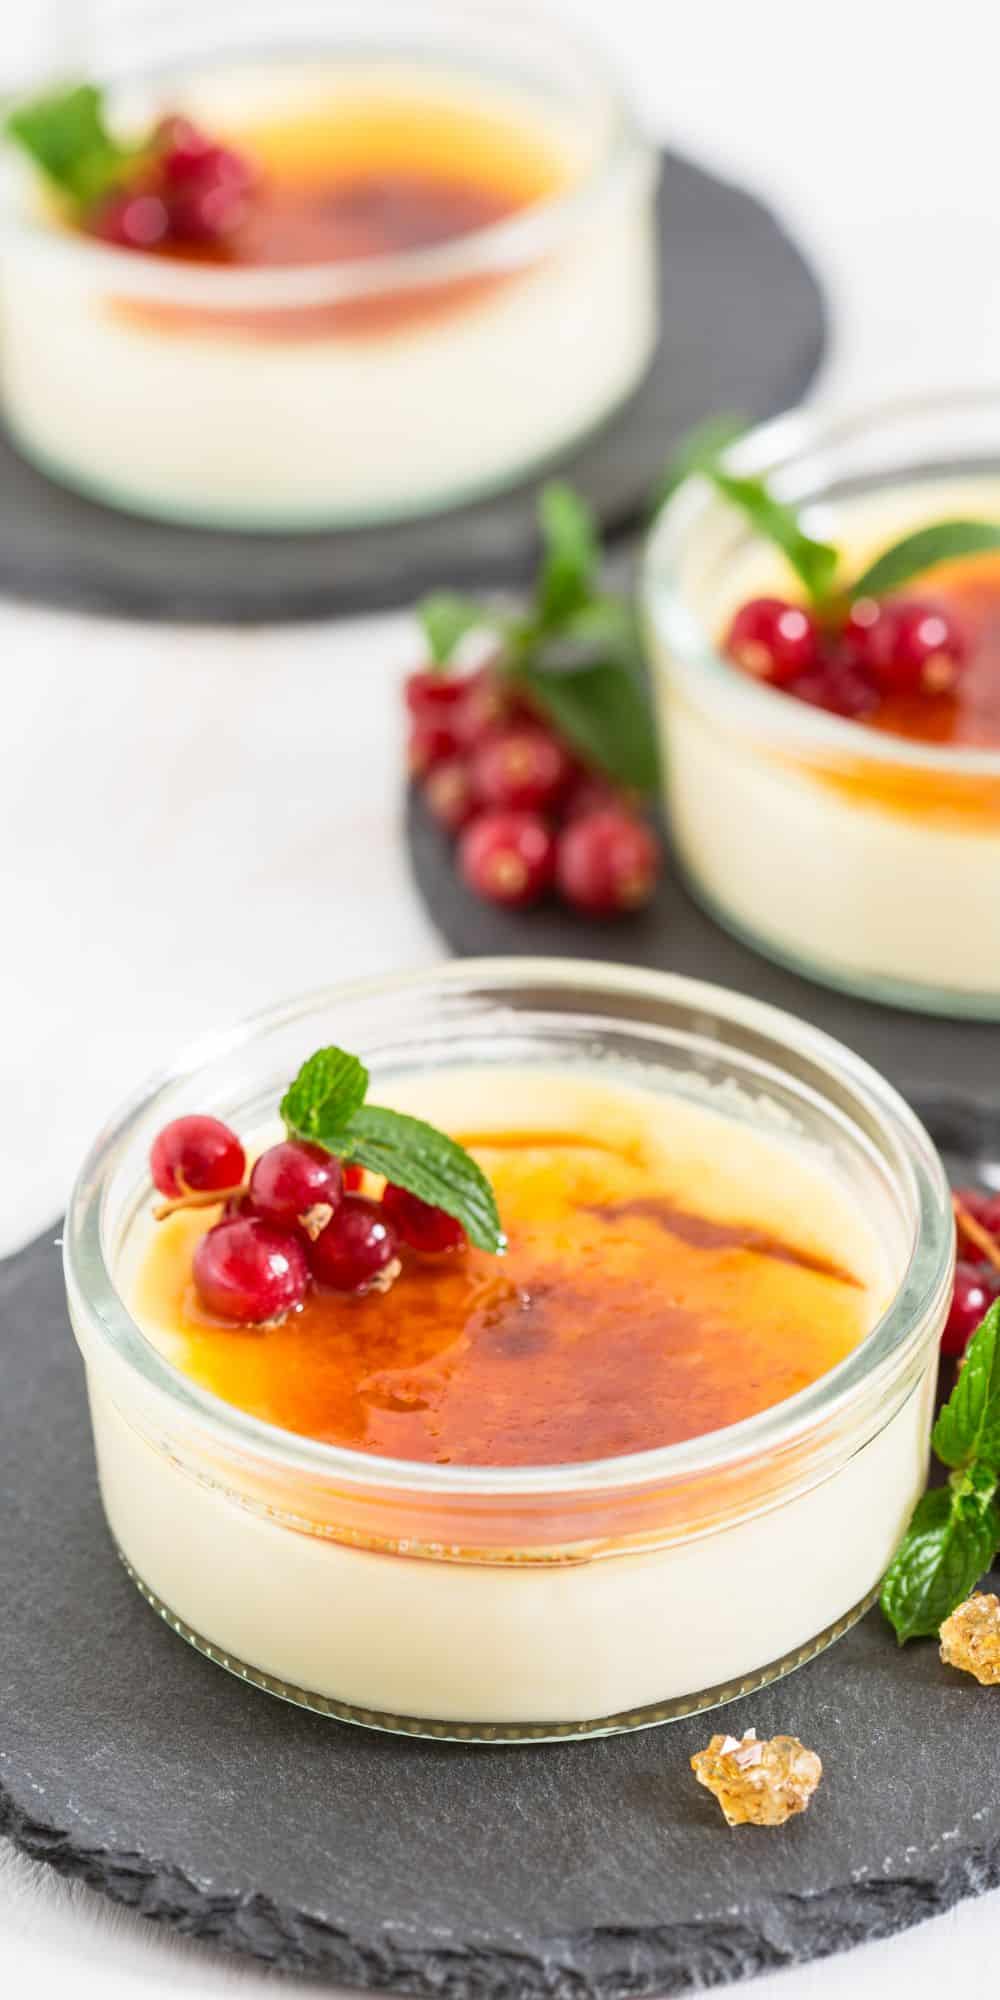 Two ramekins of coconut creme brulee garnished with fresh currants and mint leaves.